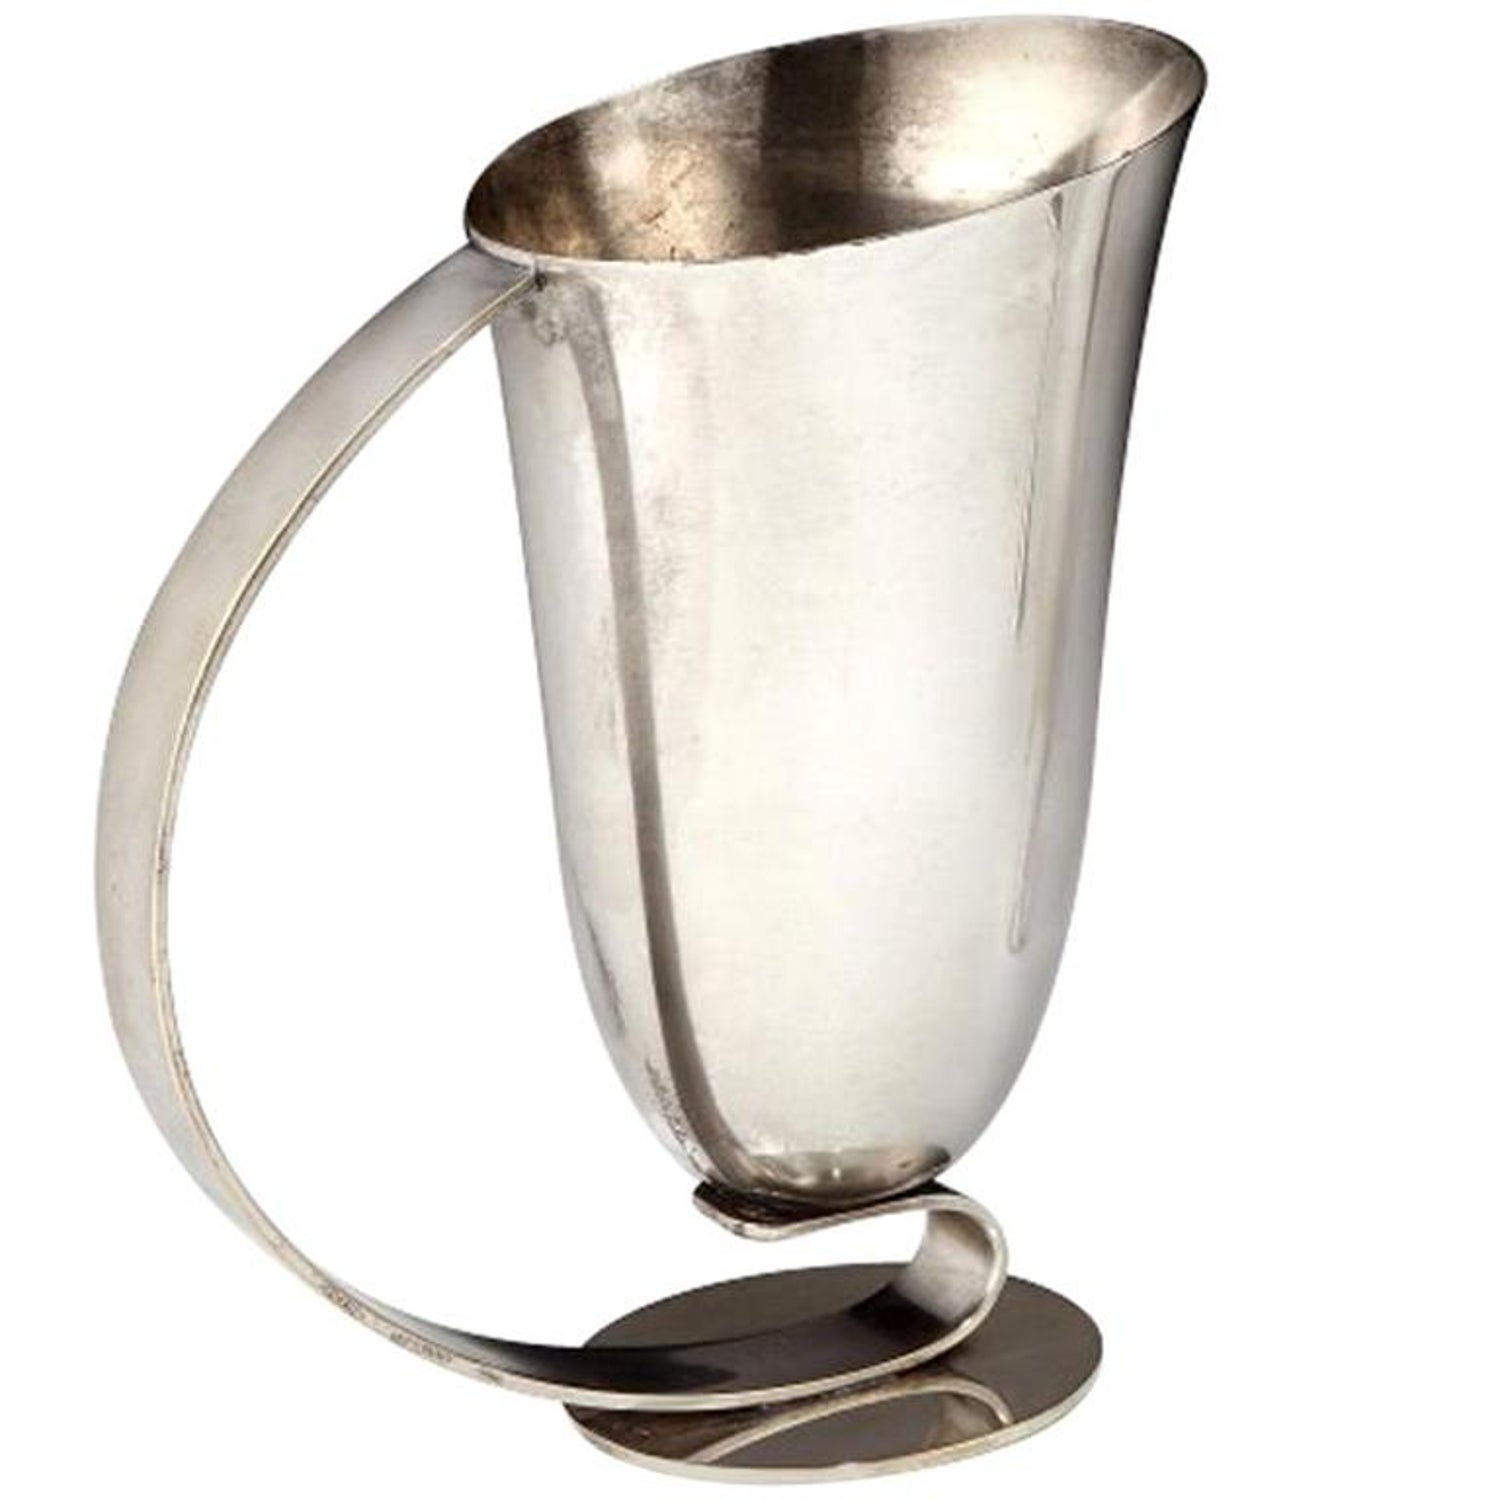 Art Deco pitcher or jug by Maison Desny (1927-1933) For Sale at 1stDibs